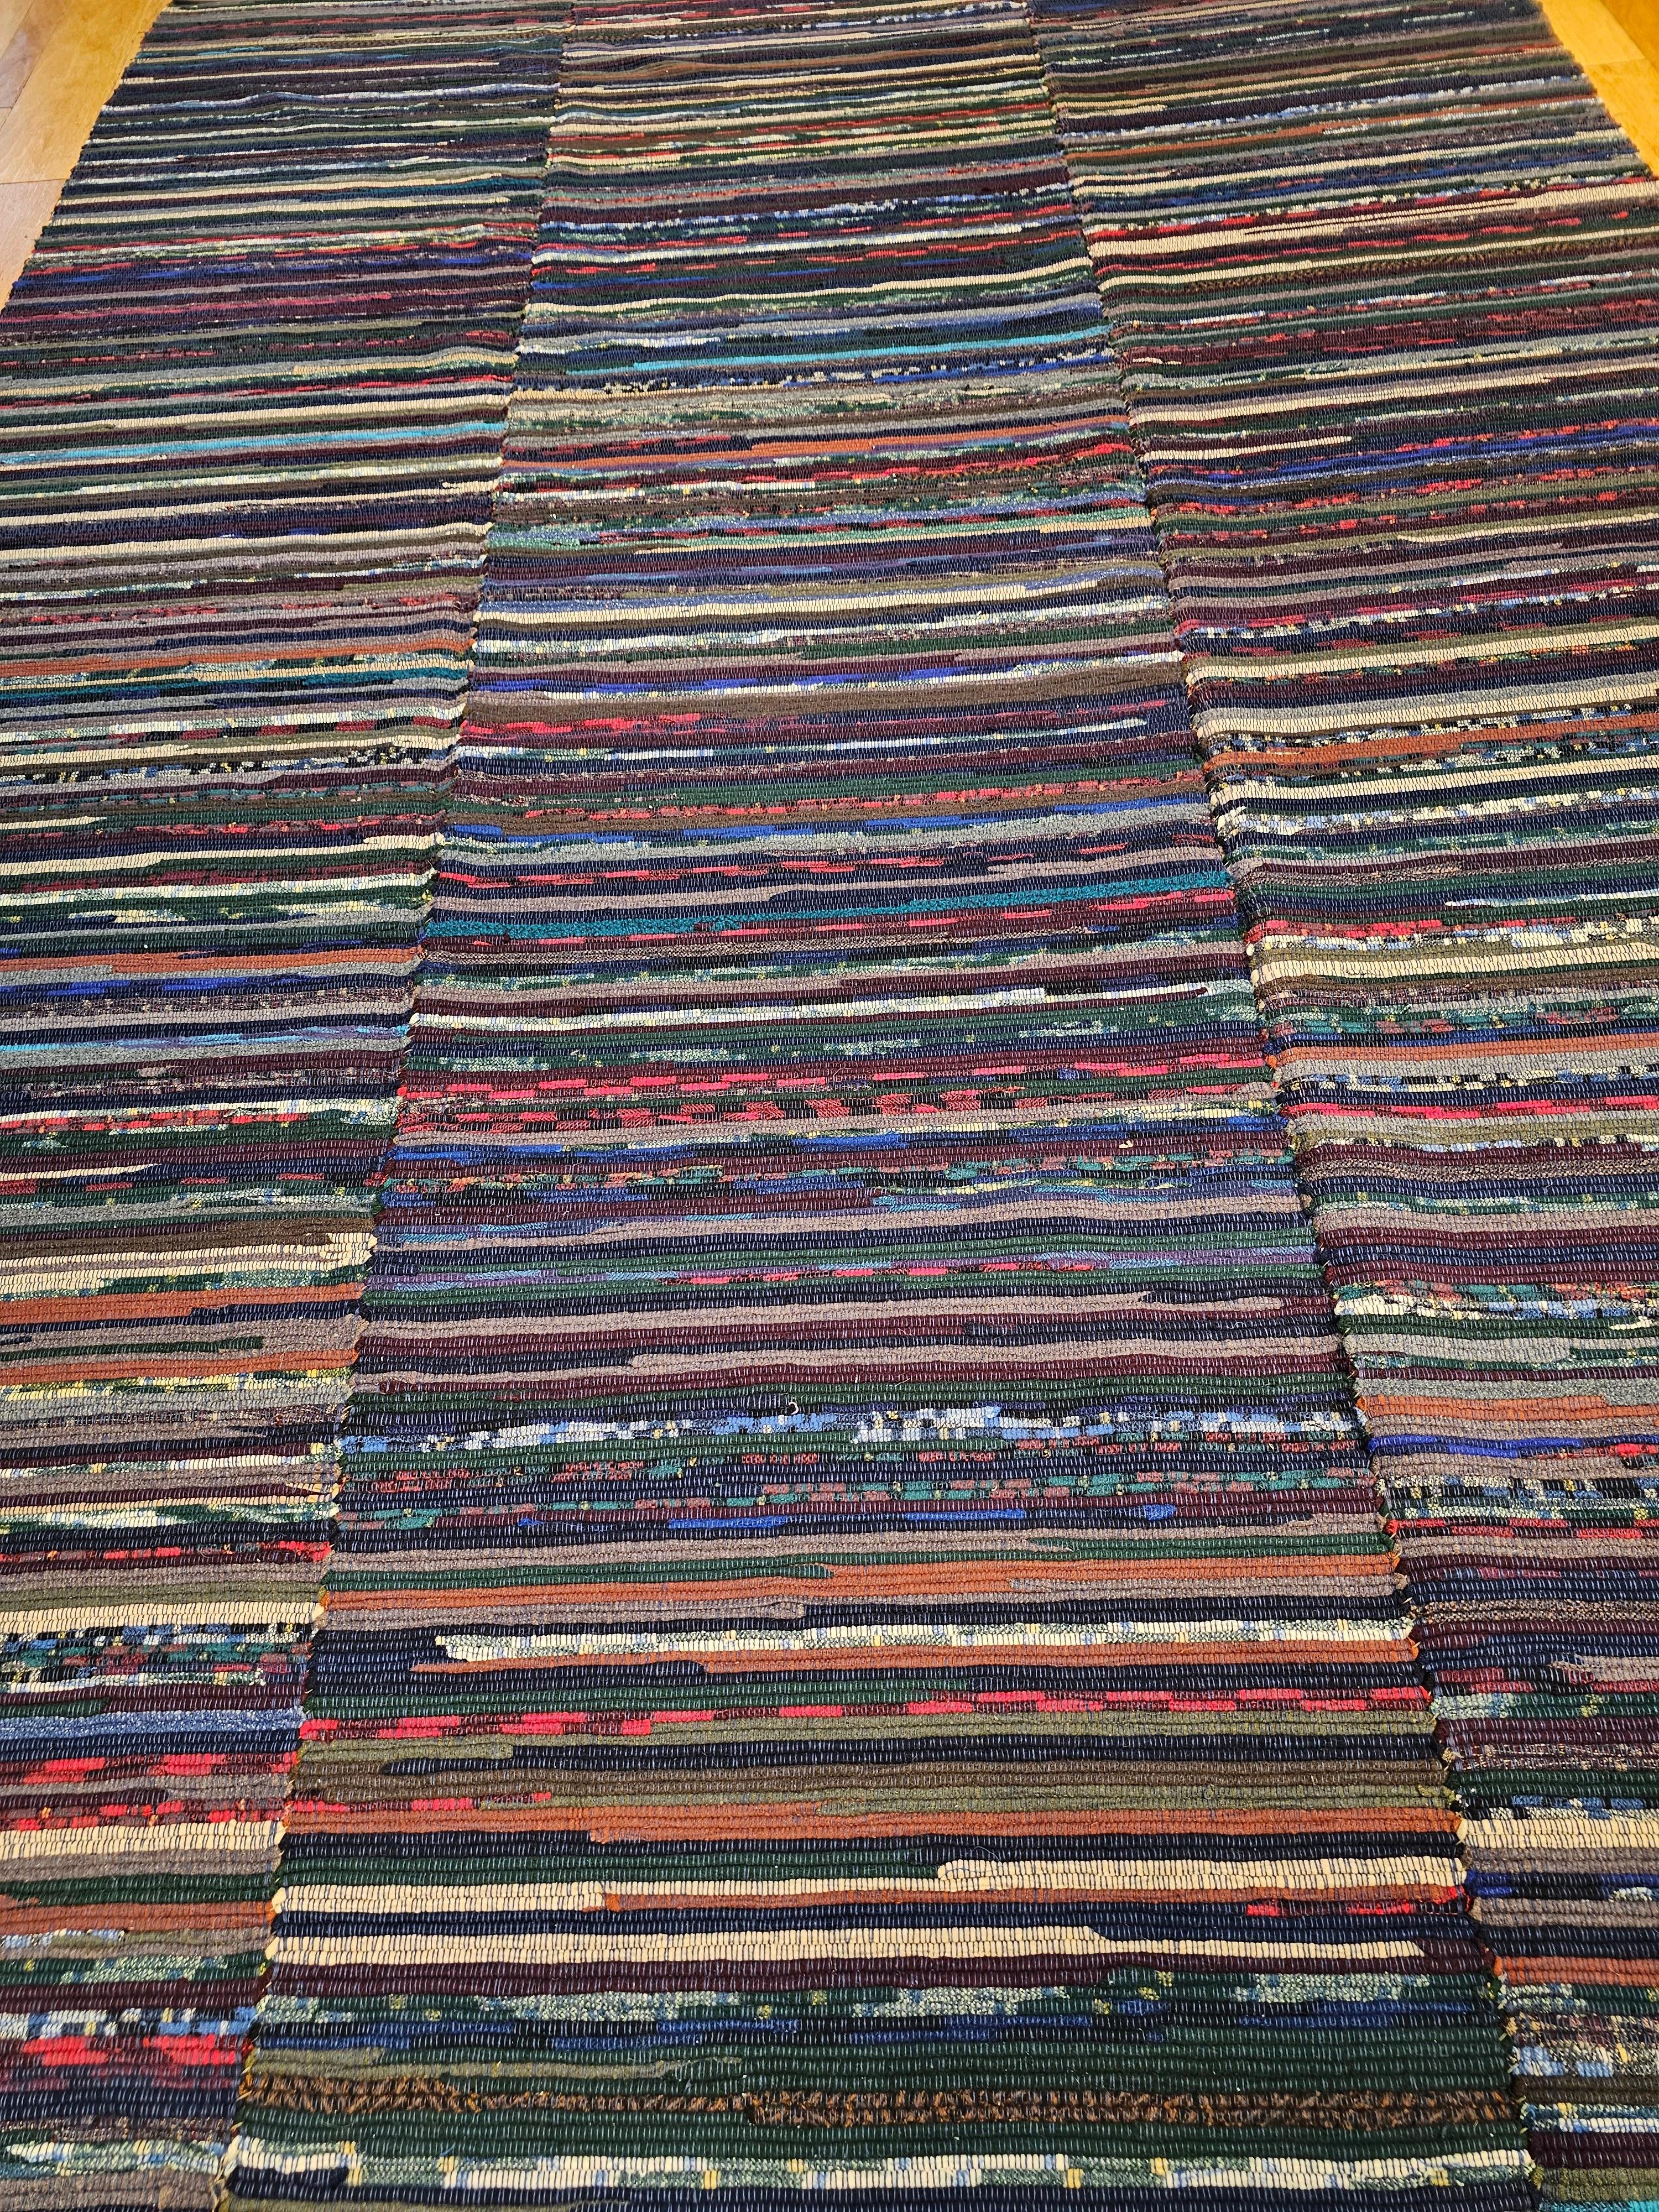 Vintage room size American rag rug in stripe pattern in vibrant colors including various shades of blue, green, red, and ivory from the early-1900s. It has lovely colors and is very well preserved. This American Rag Rug is made of three individual